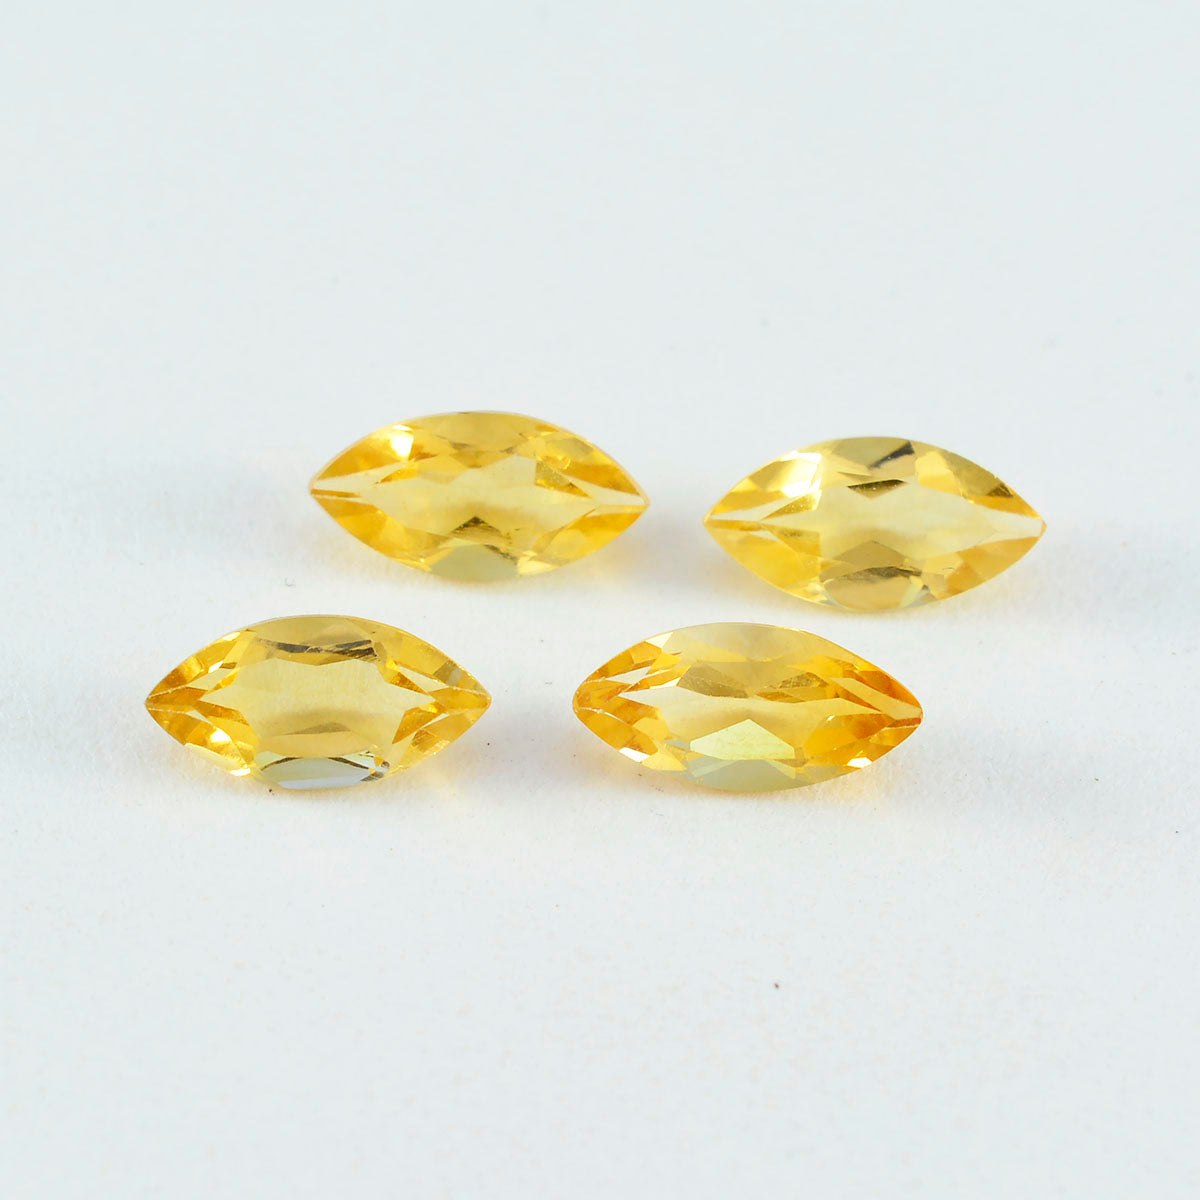 Riyogems 1PC Natural Yellow Citrine Faceted 6x12 mm Marquise Shape AAA Quality Loose Gemstone